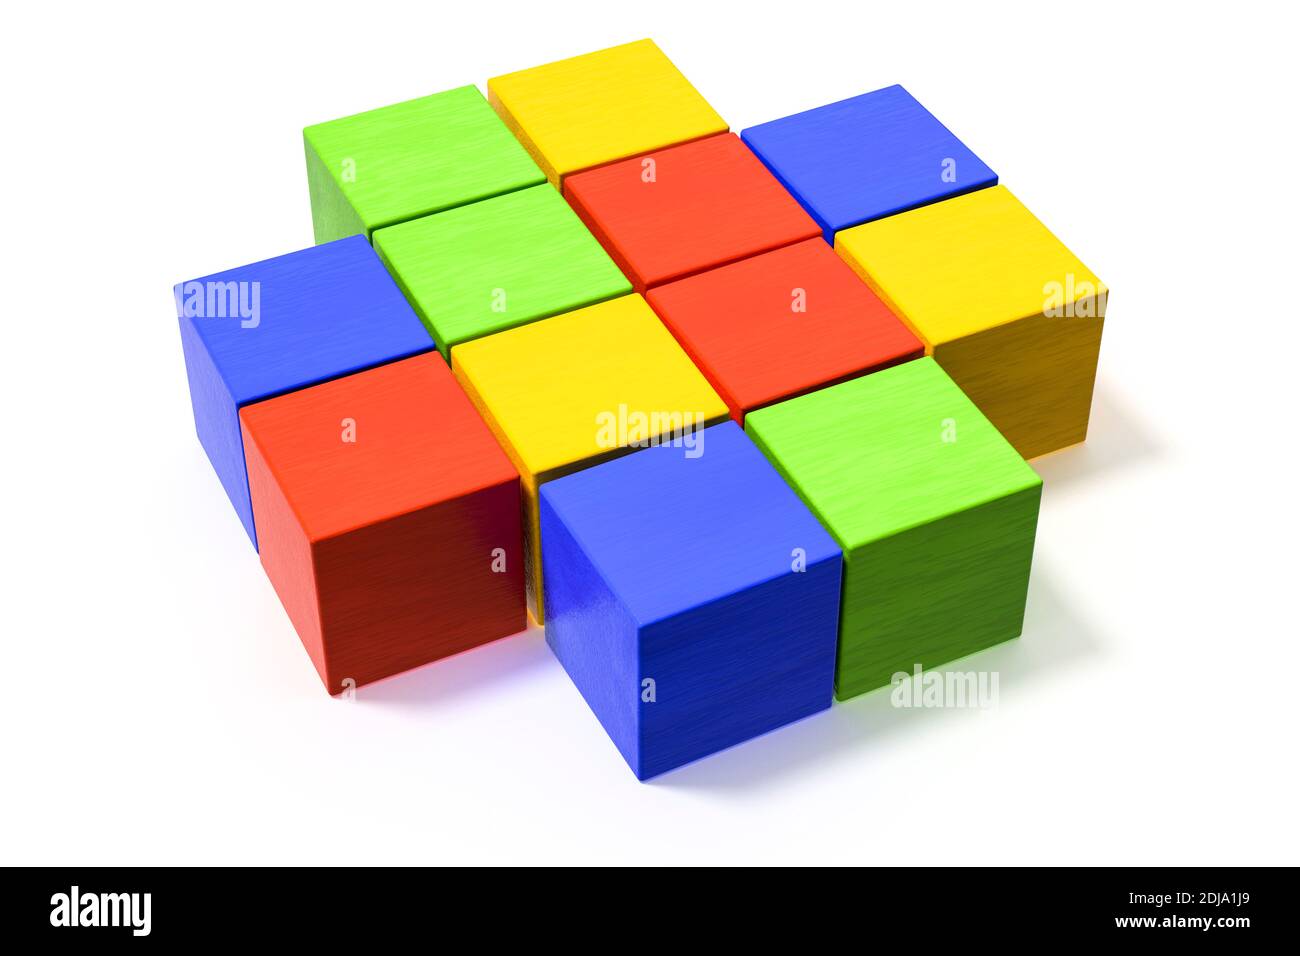 3d illustration of some colorful building blocks Stock Photo